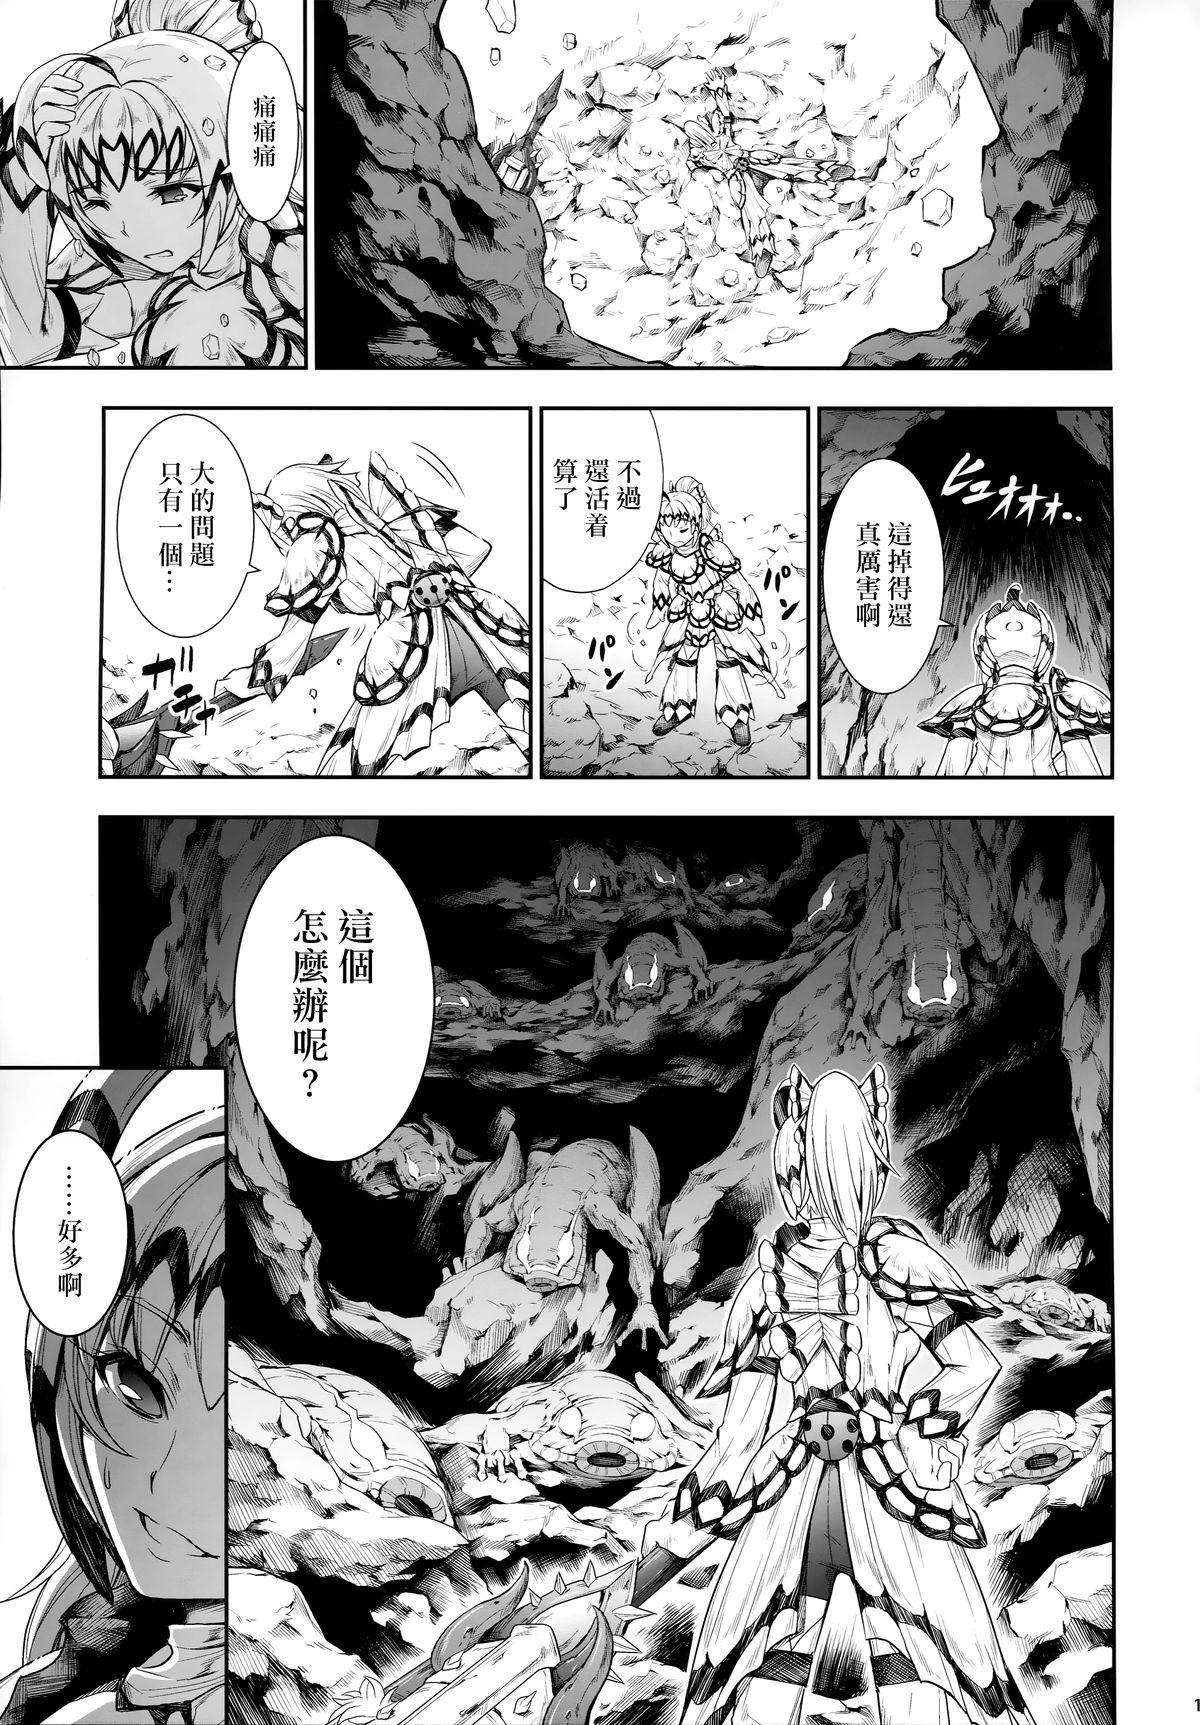 Blowjob Solo Hunter no Seitai 4 The Fifth Part - Monster hunter Cam Girl - Page 12